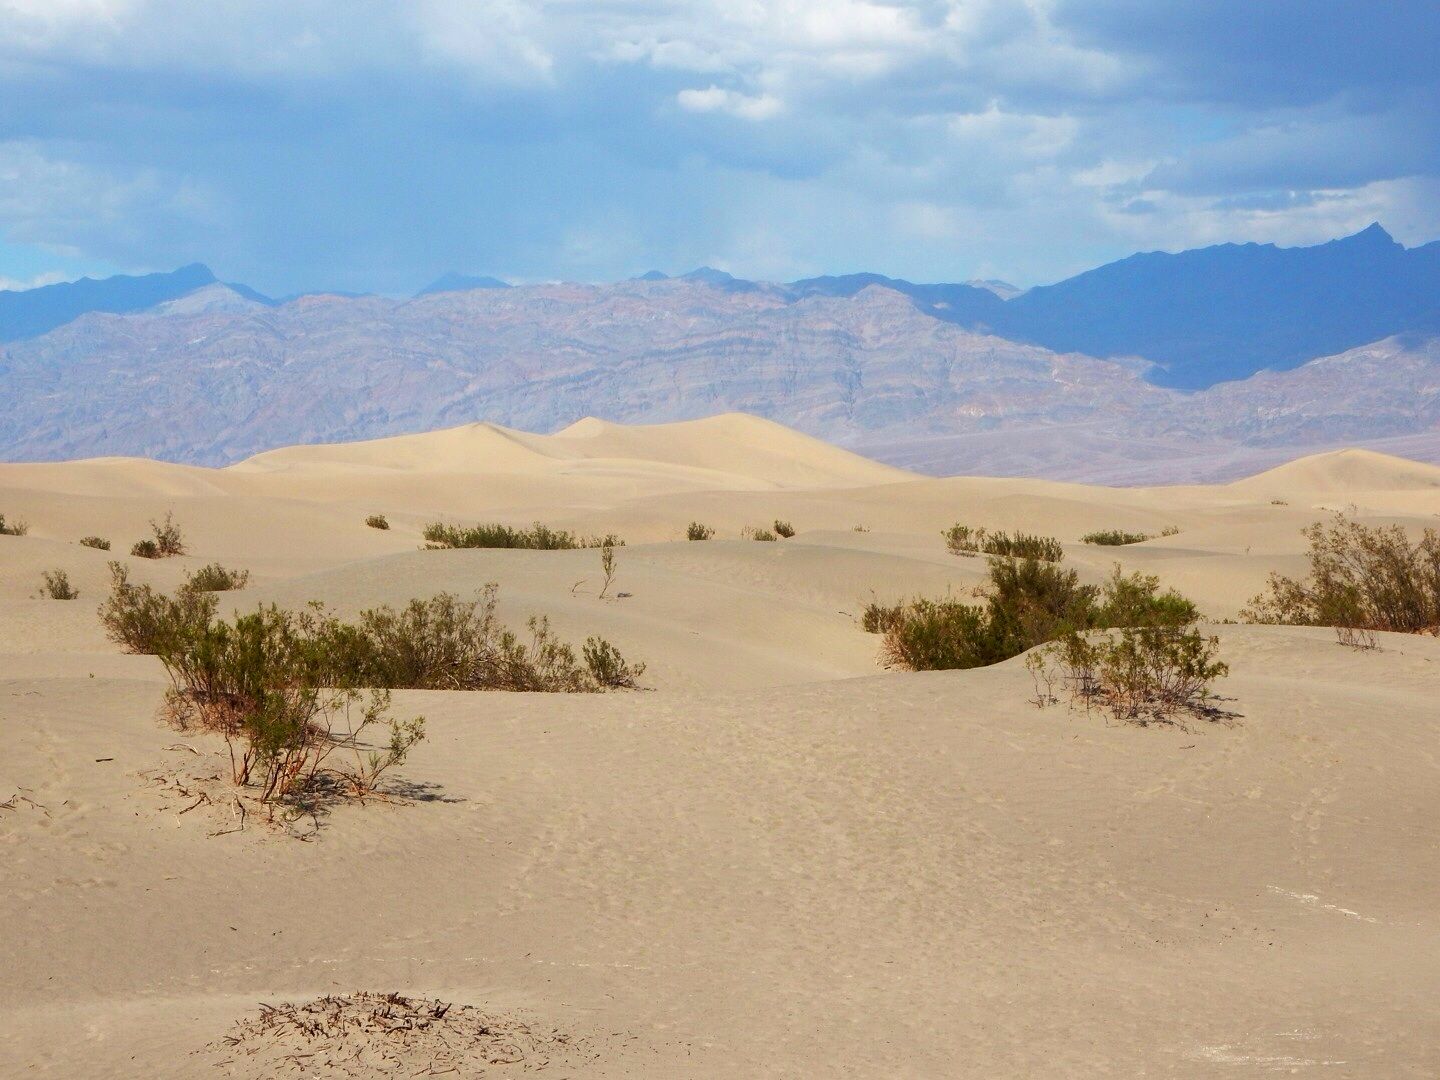 Winds of Destiny - RVLife: Death Valley, Mesquite Flat Sand Dunes - 9/27/14